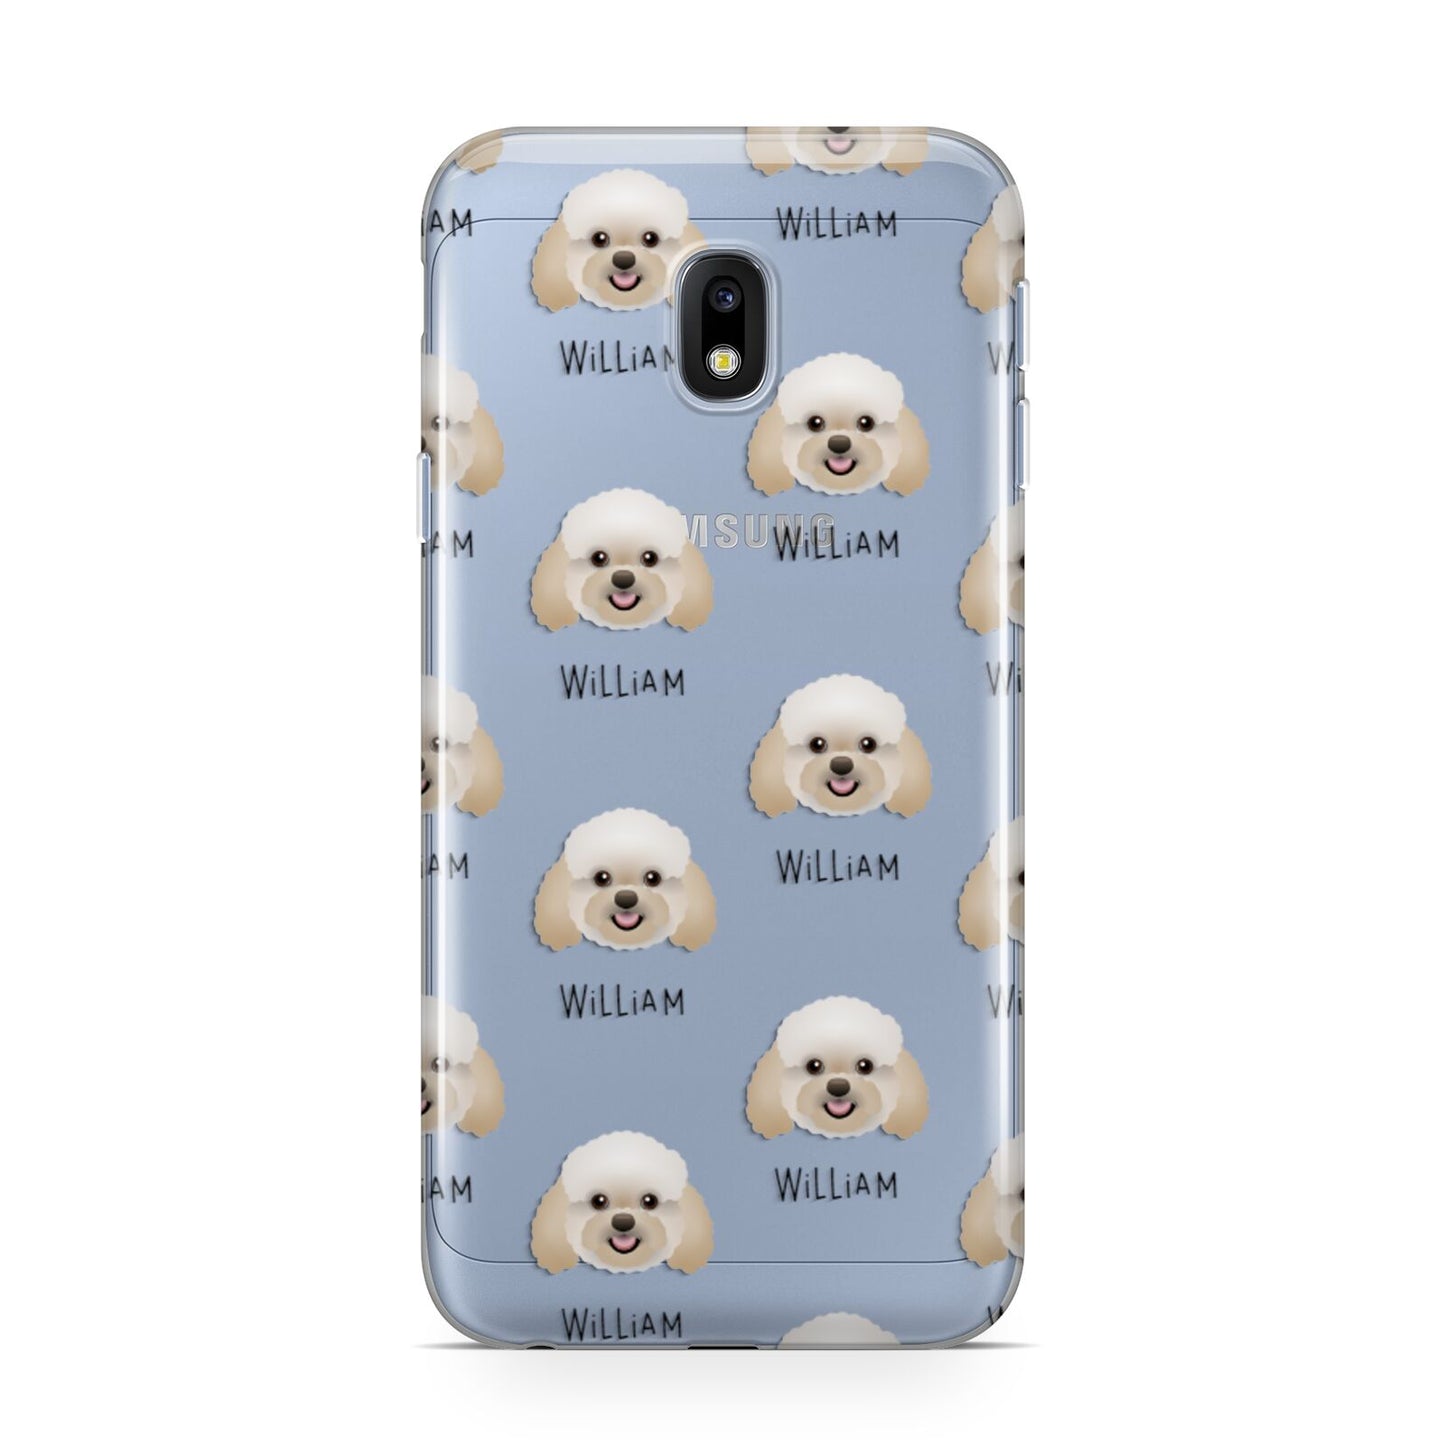 Bich poo Icon with Name Samsung Galaxy J3 2017 Case